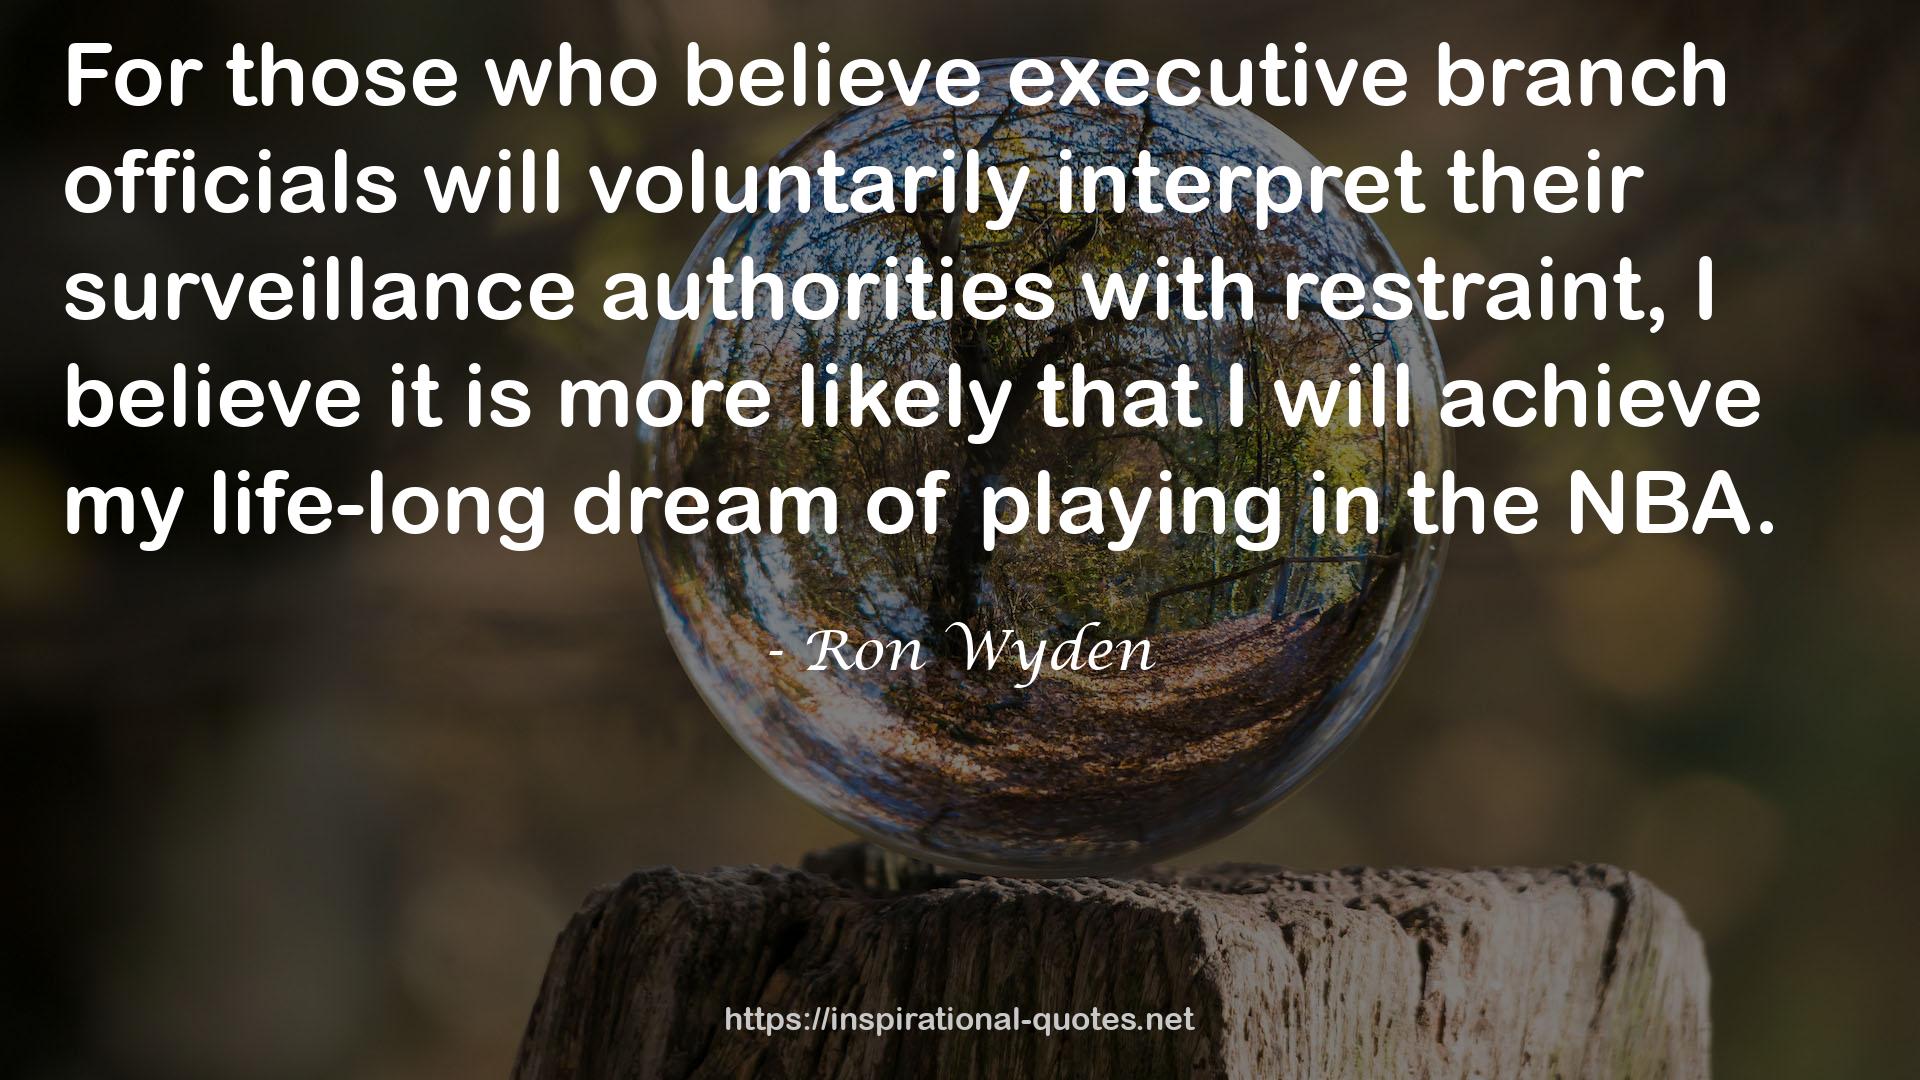 Ron Wyden QUOTES